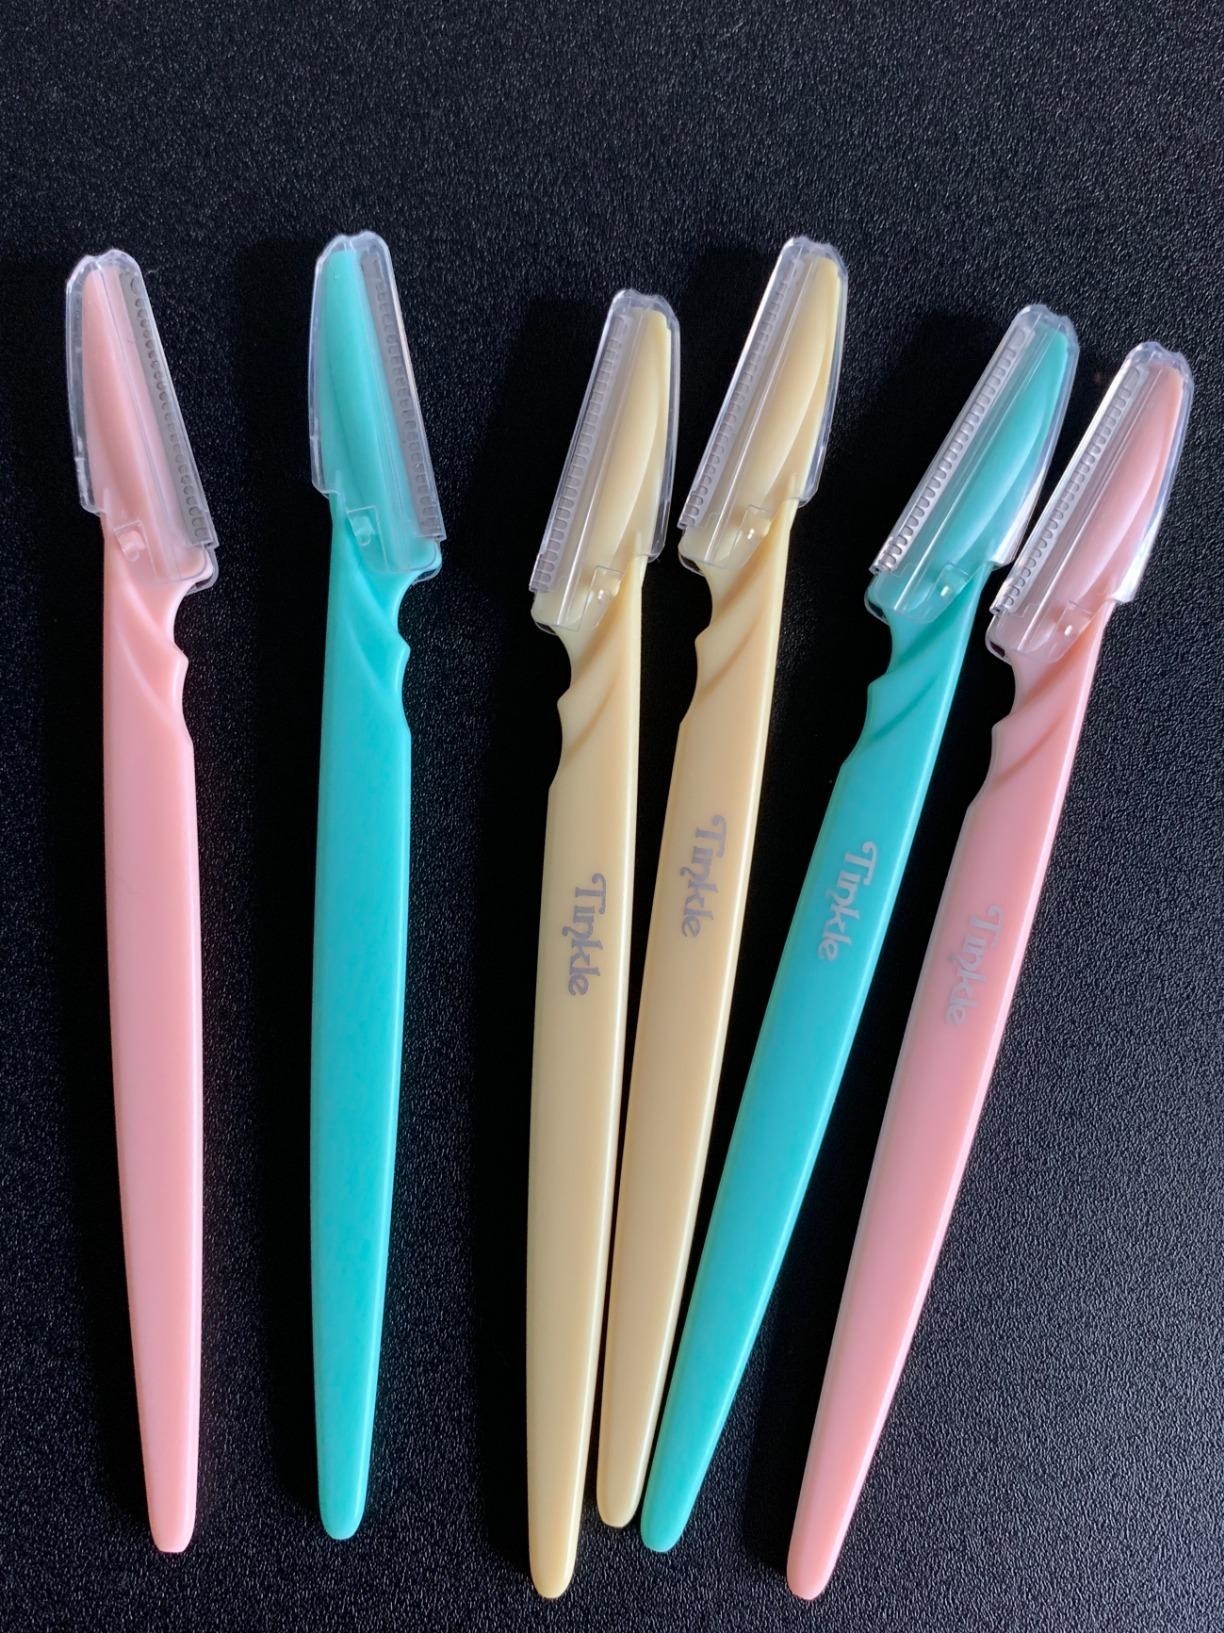 the tinkle razors in pink, blue, and yellow